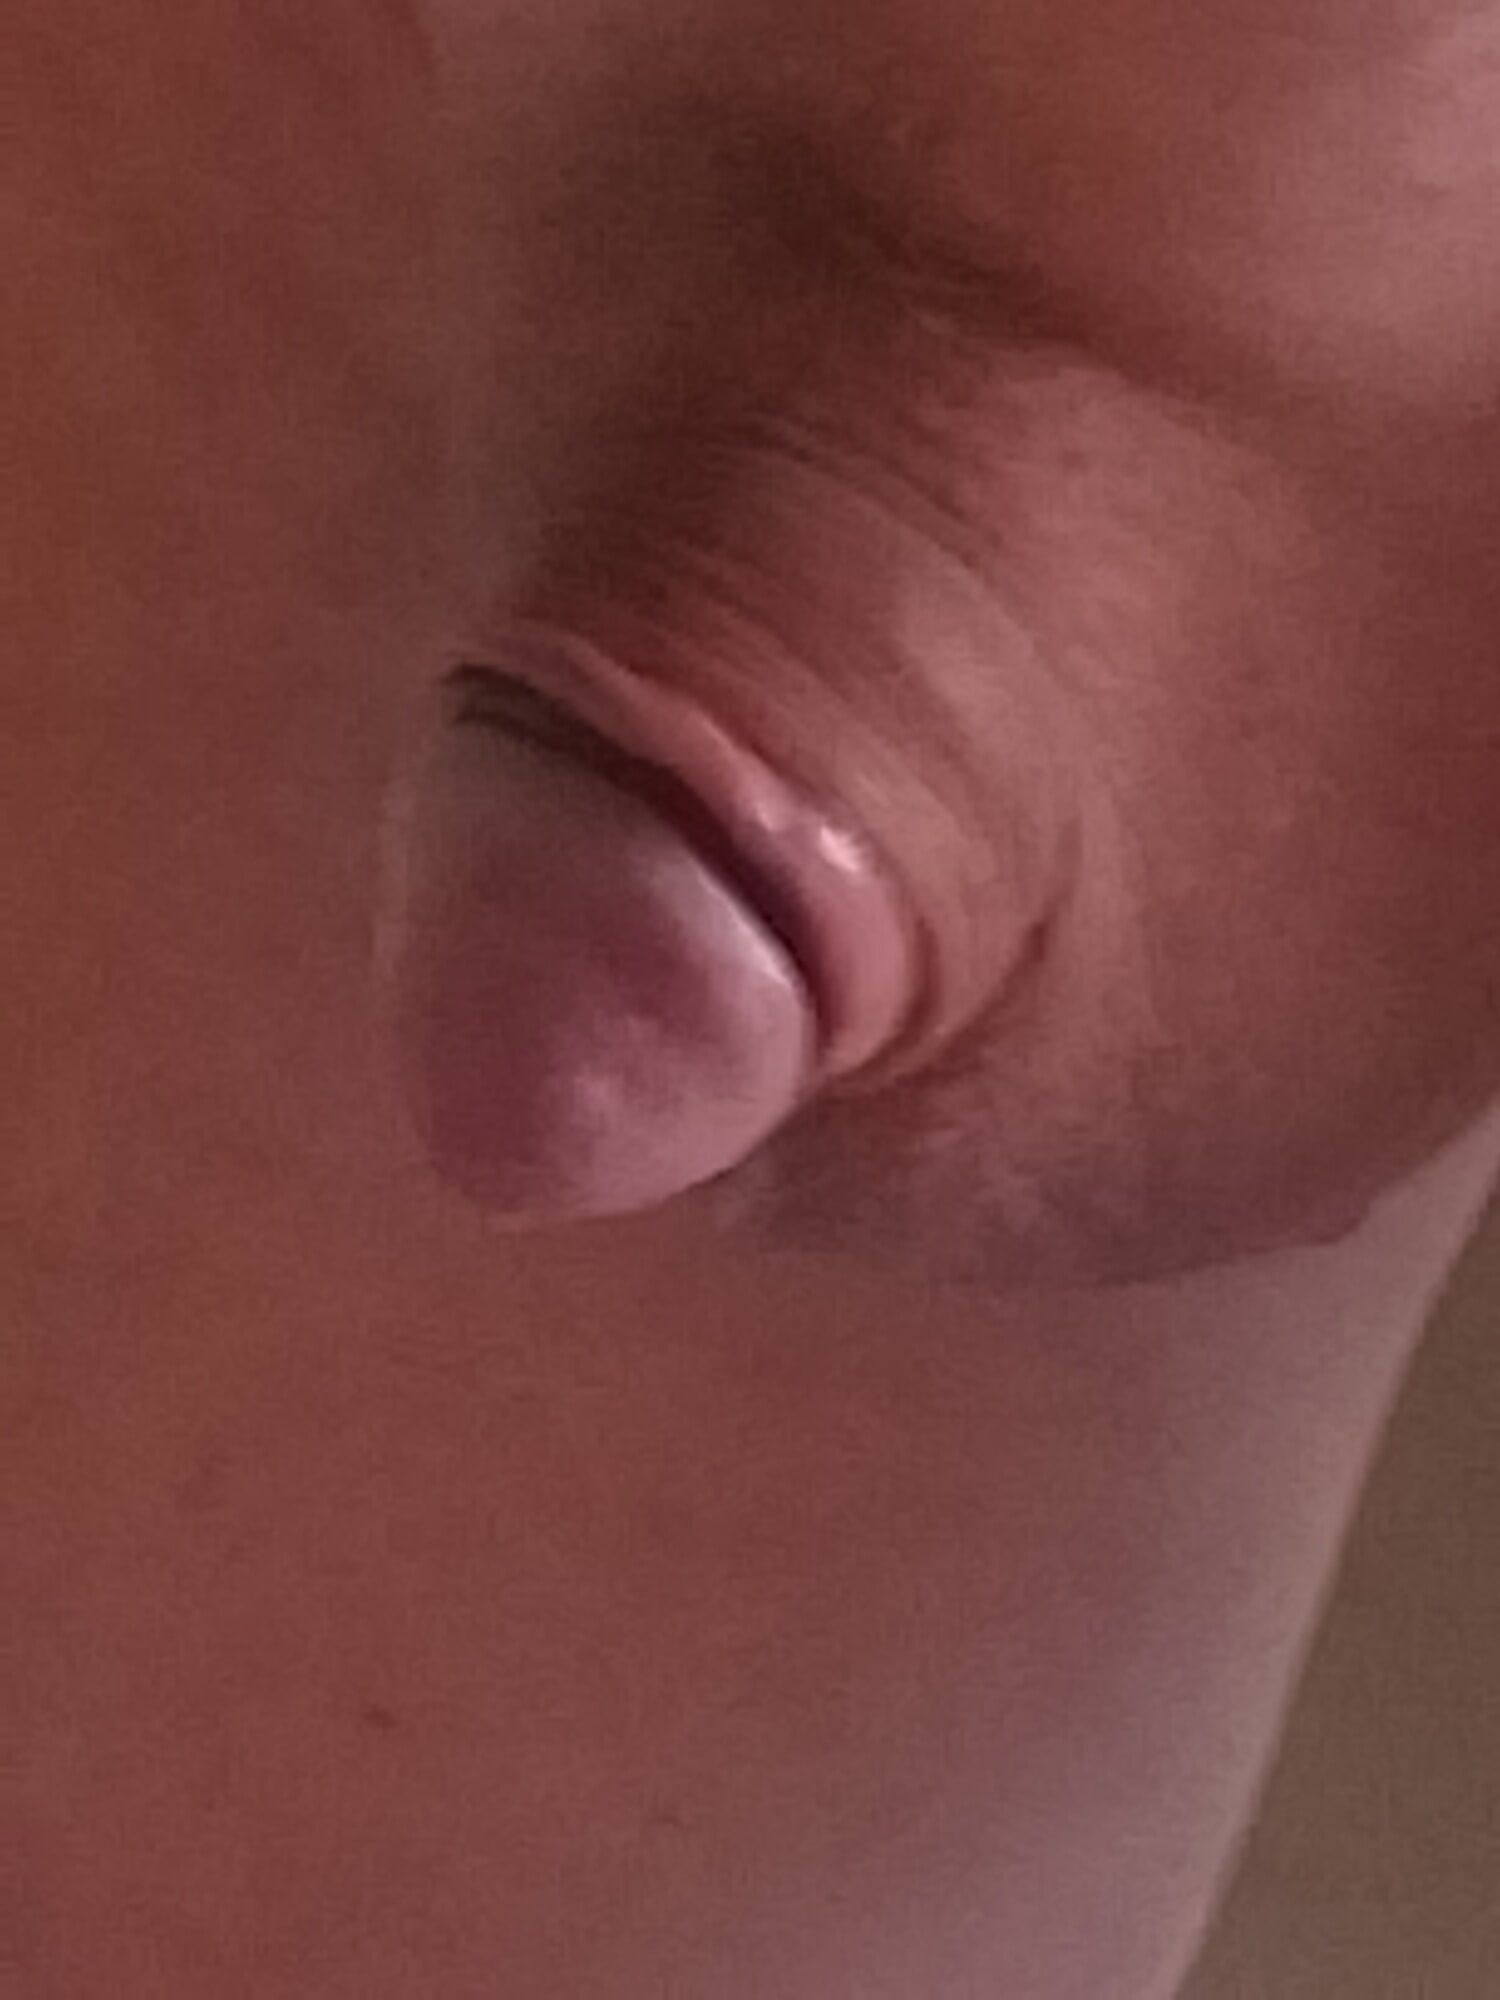 Exposed clitty dripping #8